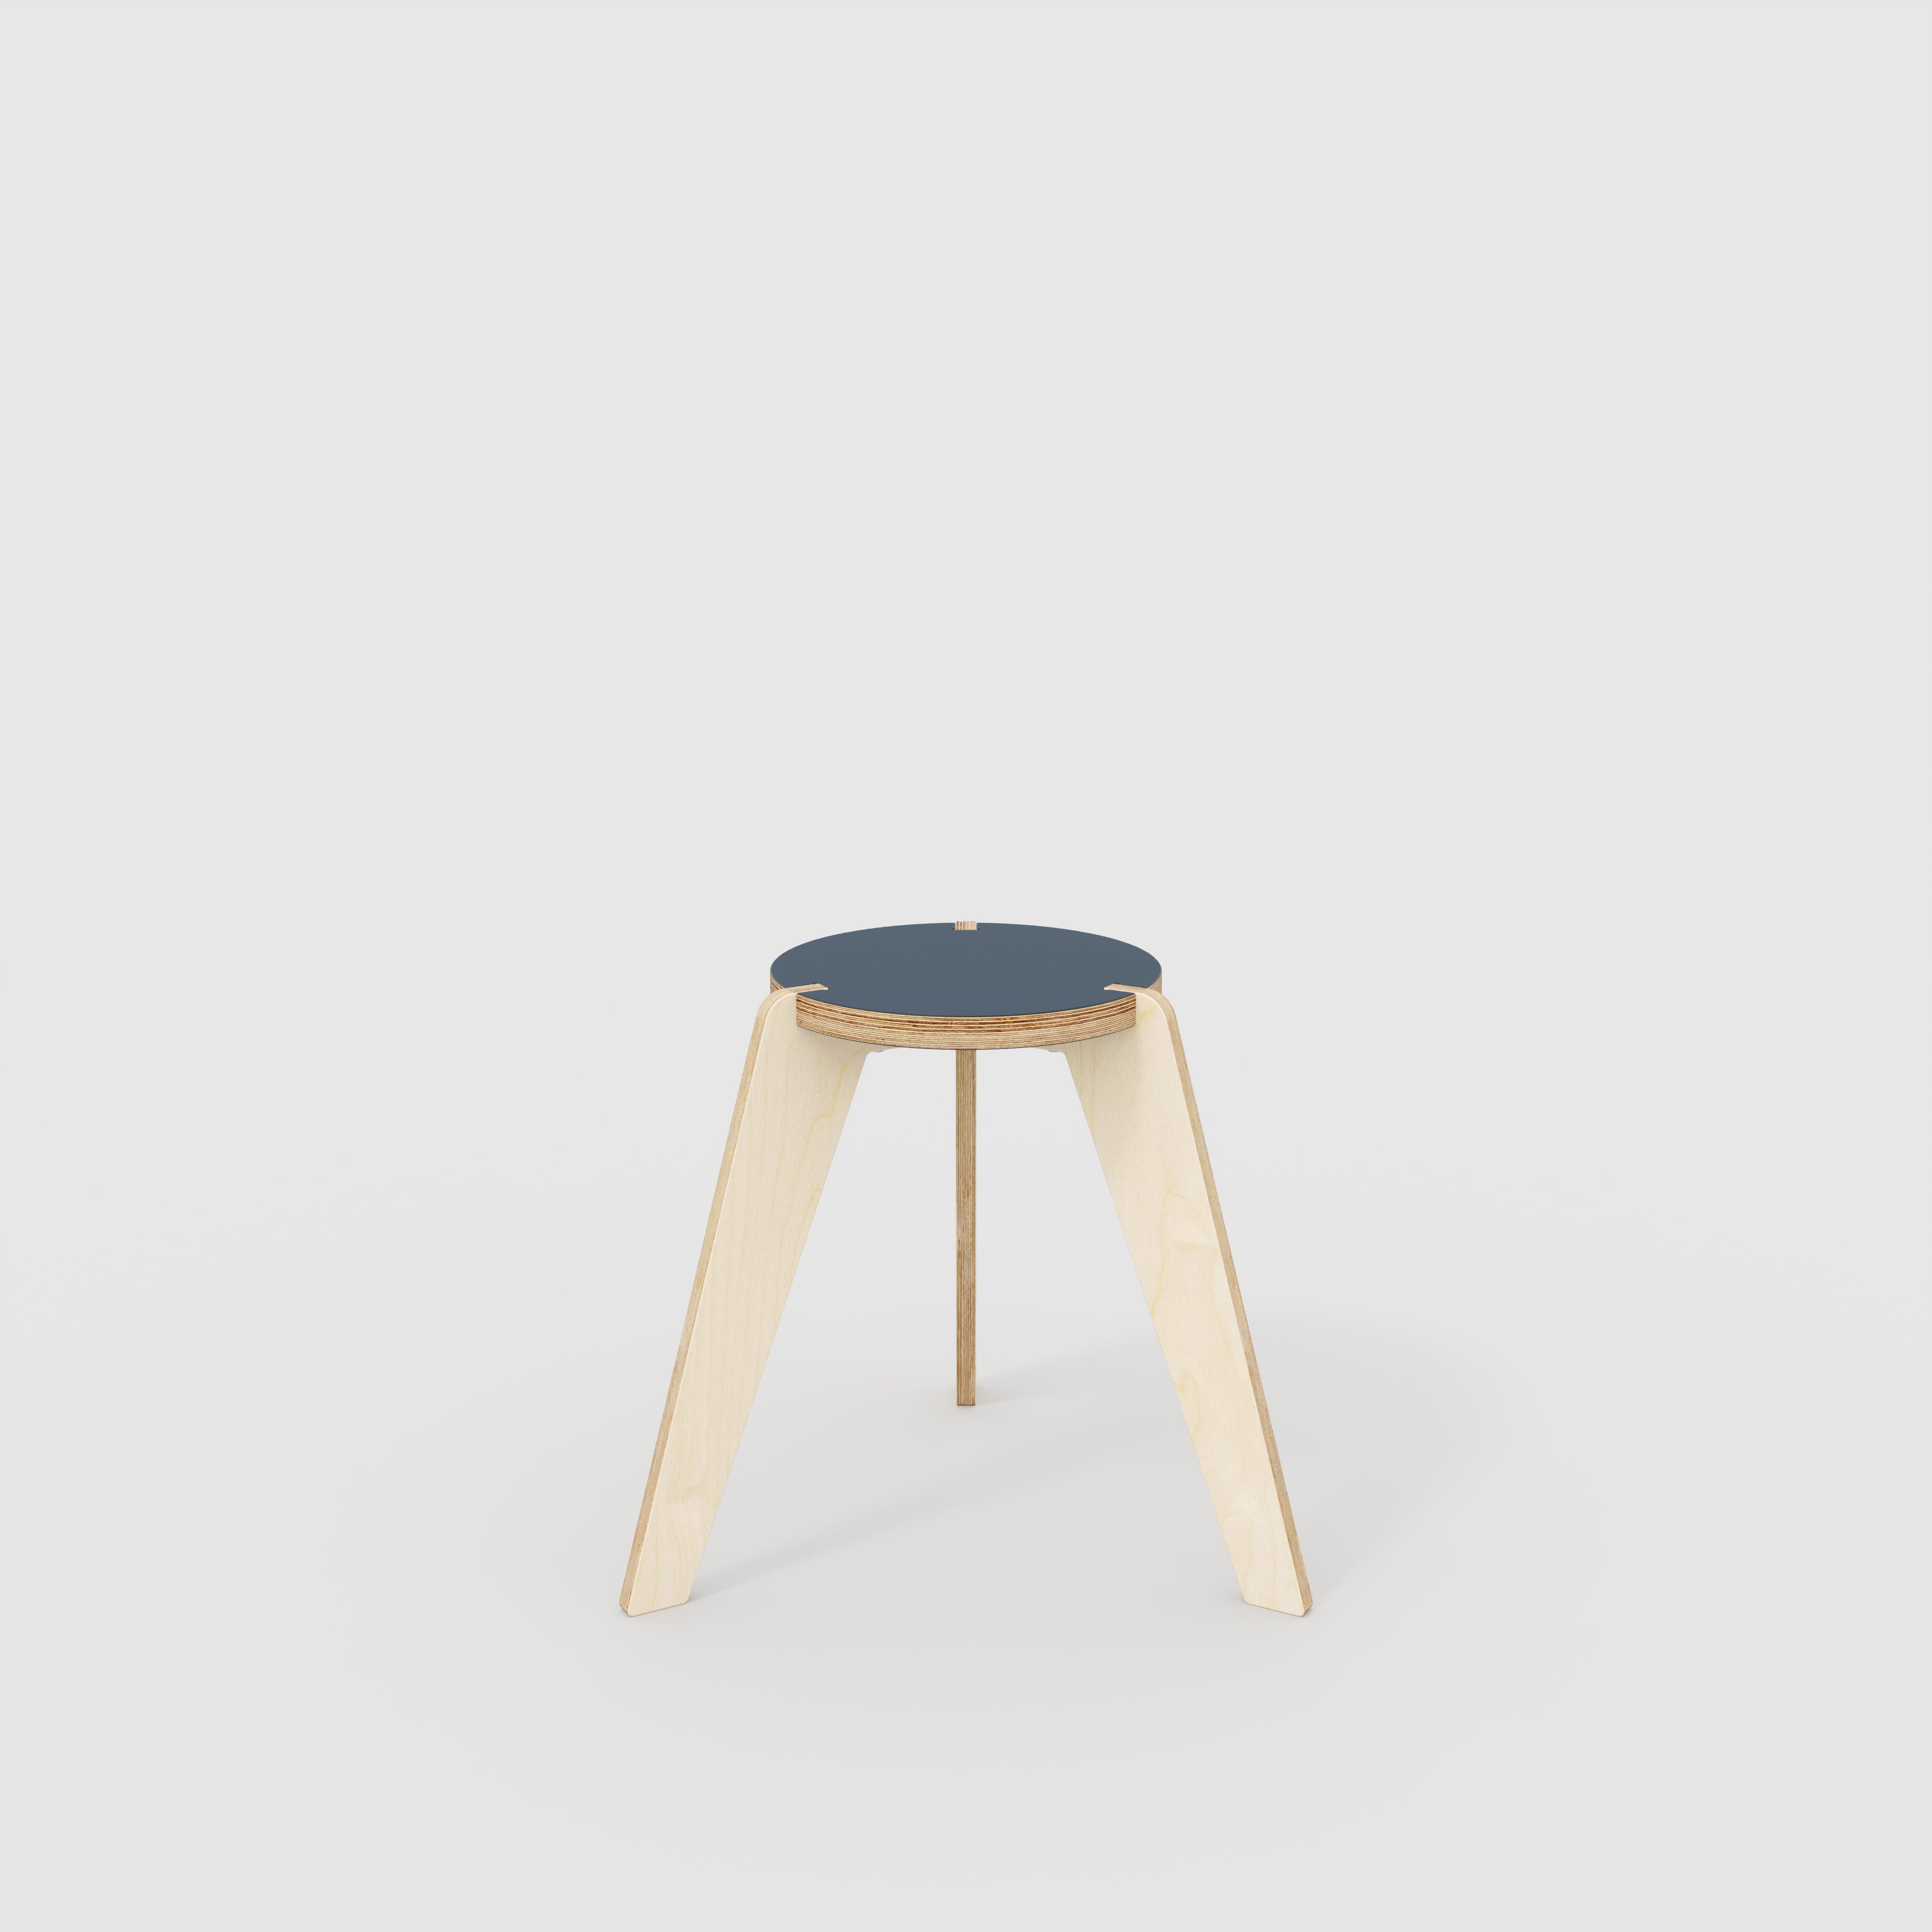 Round Stool with Plywood Legs - Formica Night Sea Blue - 525(w) x 450(d) x 450(h)